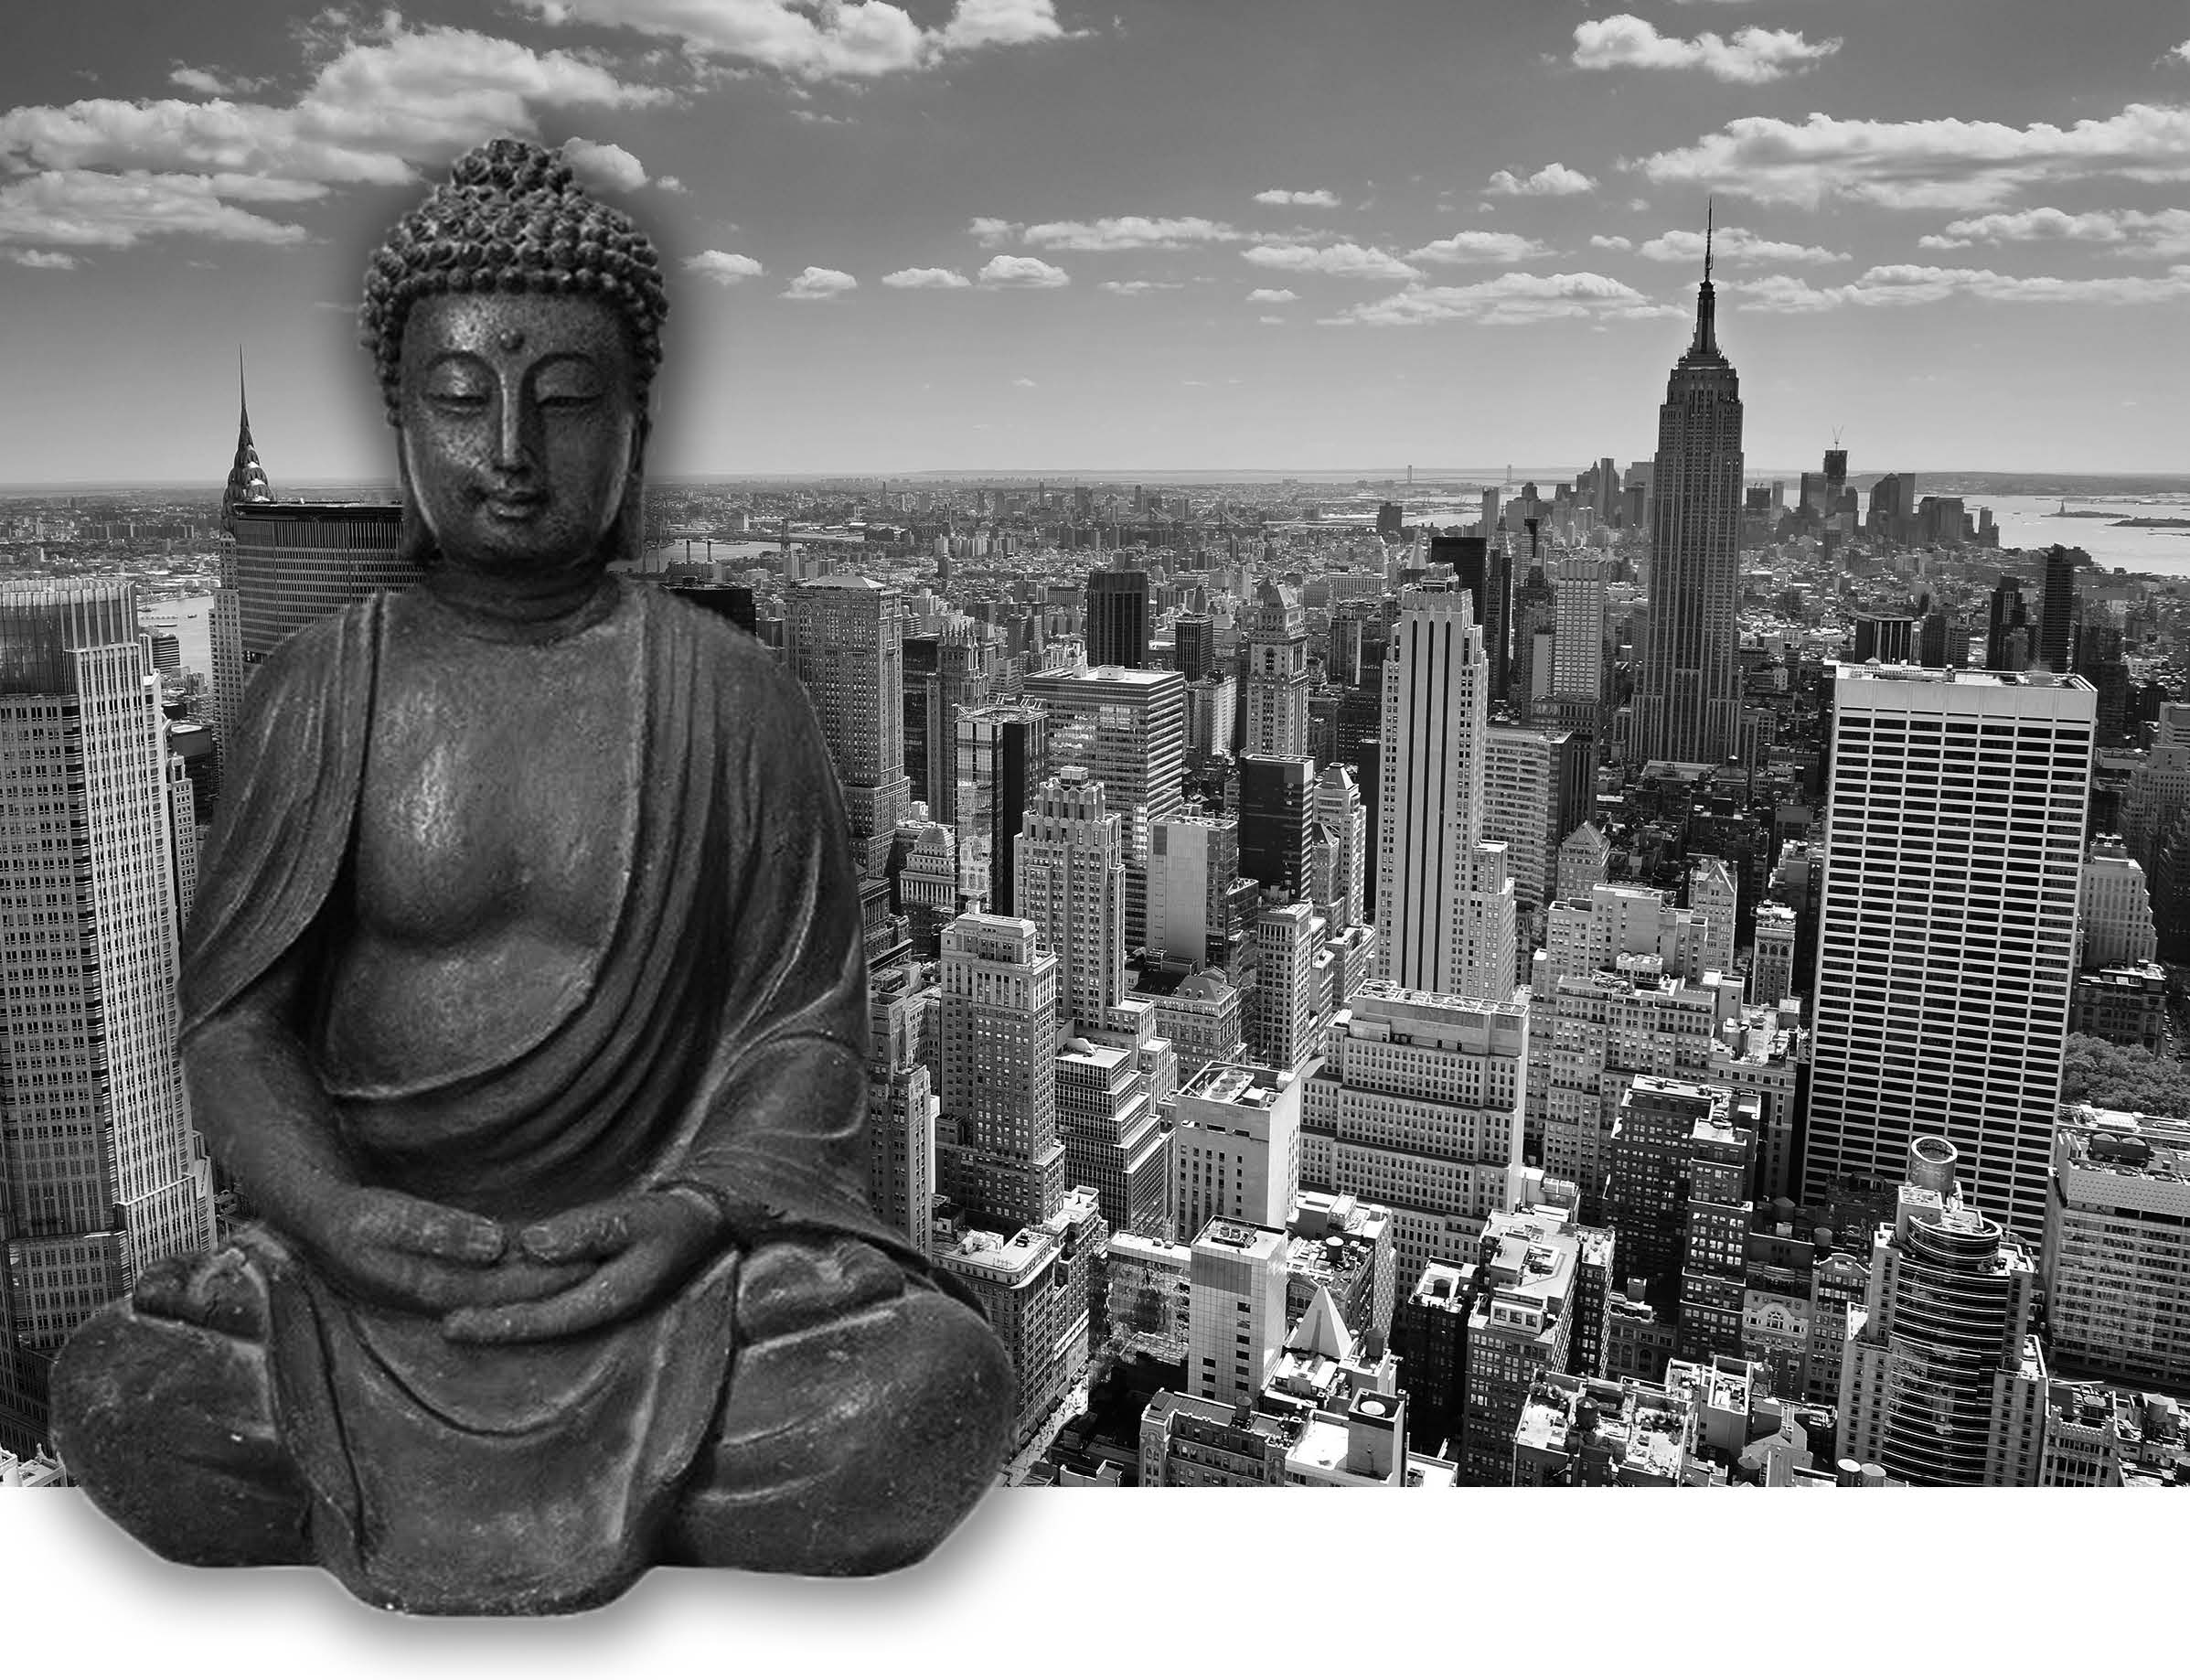 Photograph of downtown New York City with an image of a Buddha statue pasted in the left half of the photo. 